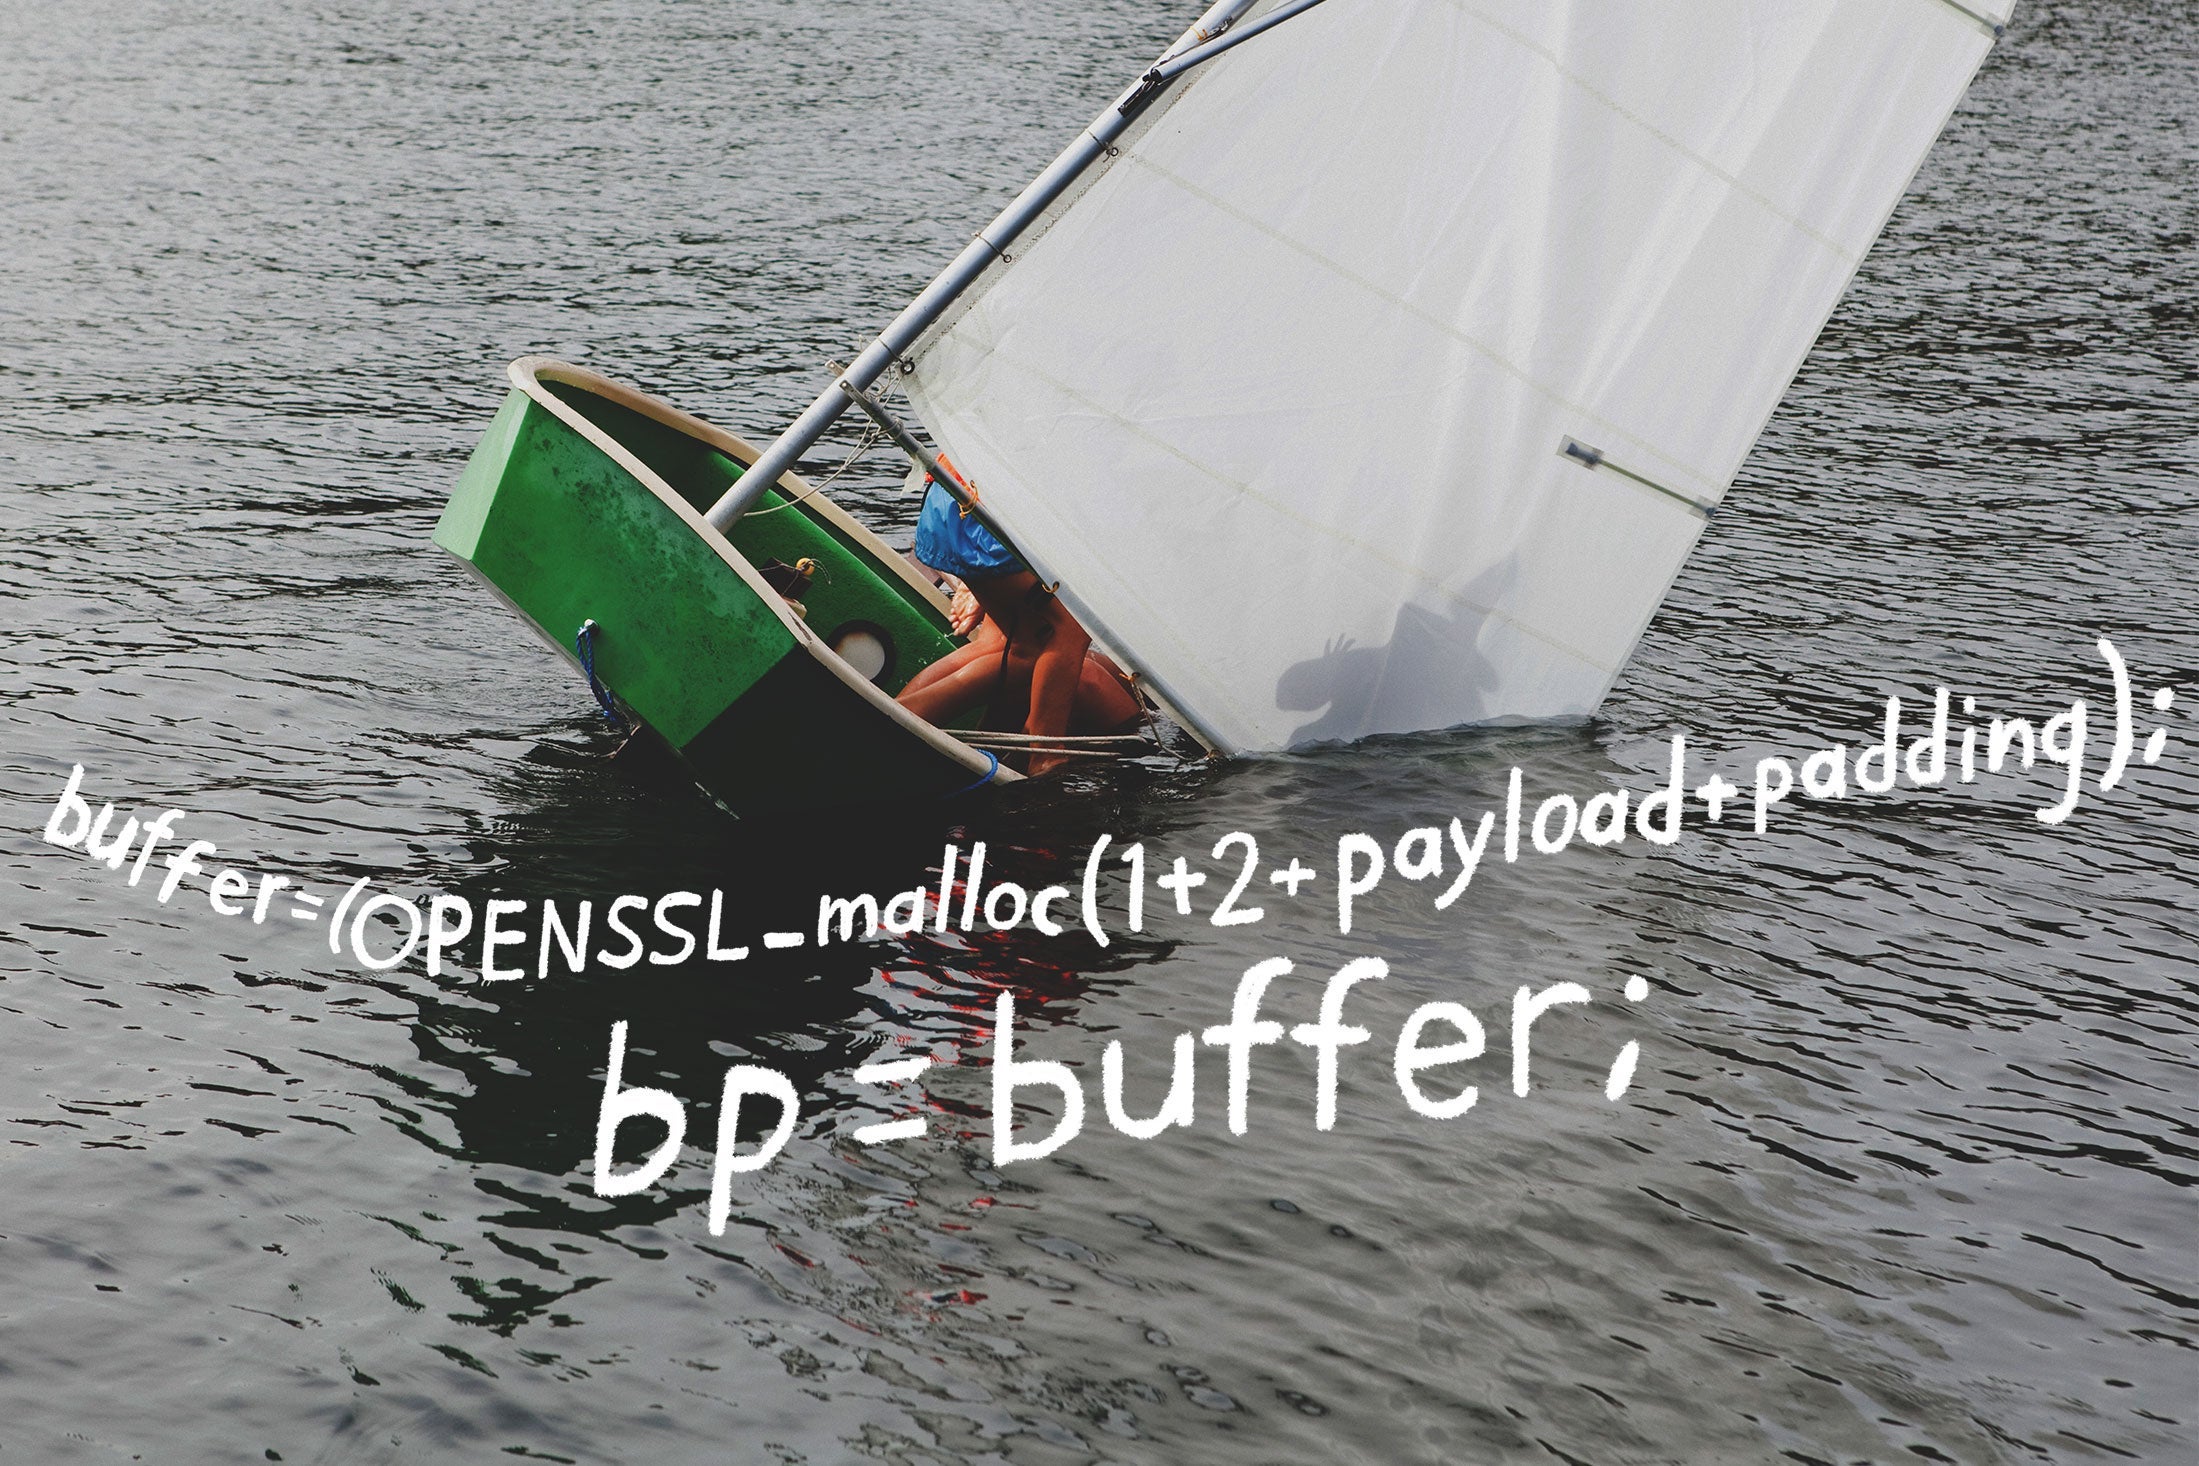 Sinking sailing dinghy sinking into Heartbleed code: buffer = OPENSSL_malloc(1 + 2 + payload + padding); bp = buffer; 